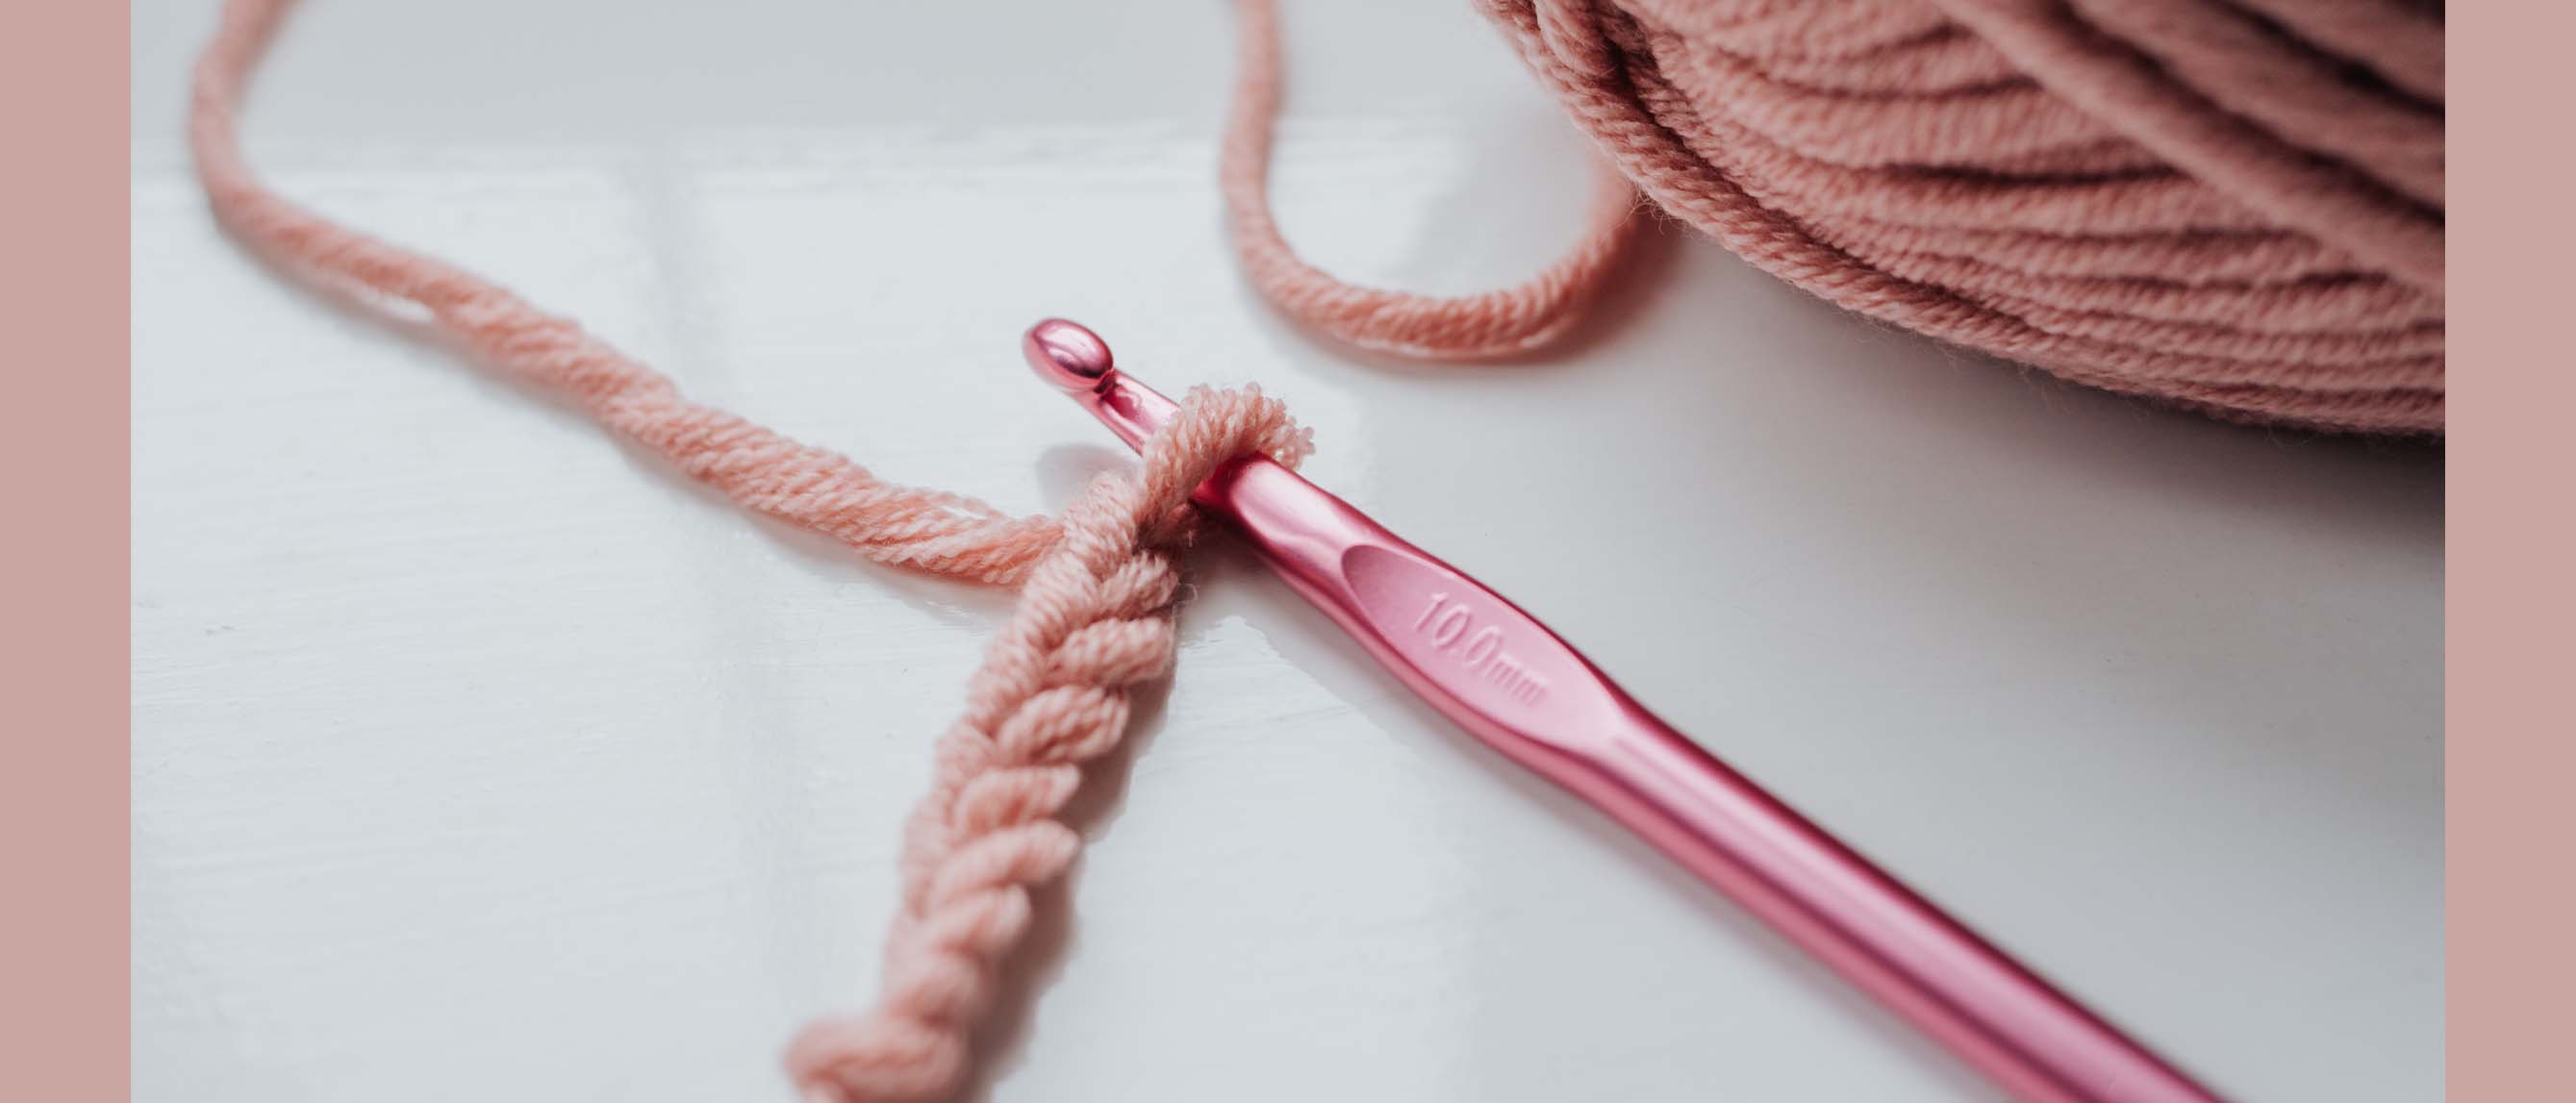 Crochet 101 - 5 Best Crochet Hook Sets and Where to Buy Them